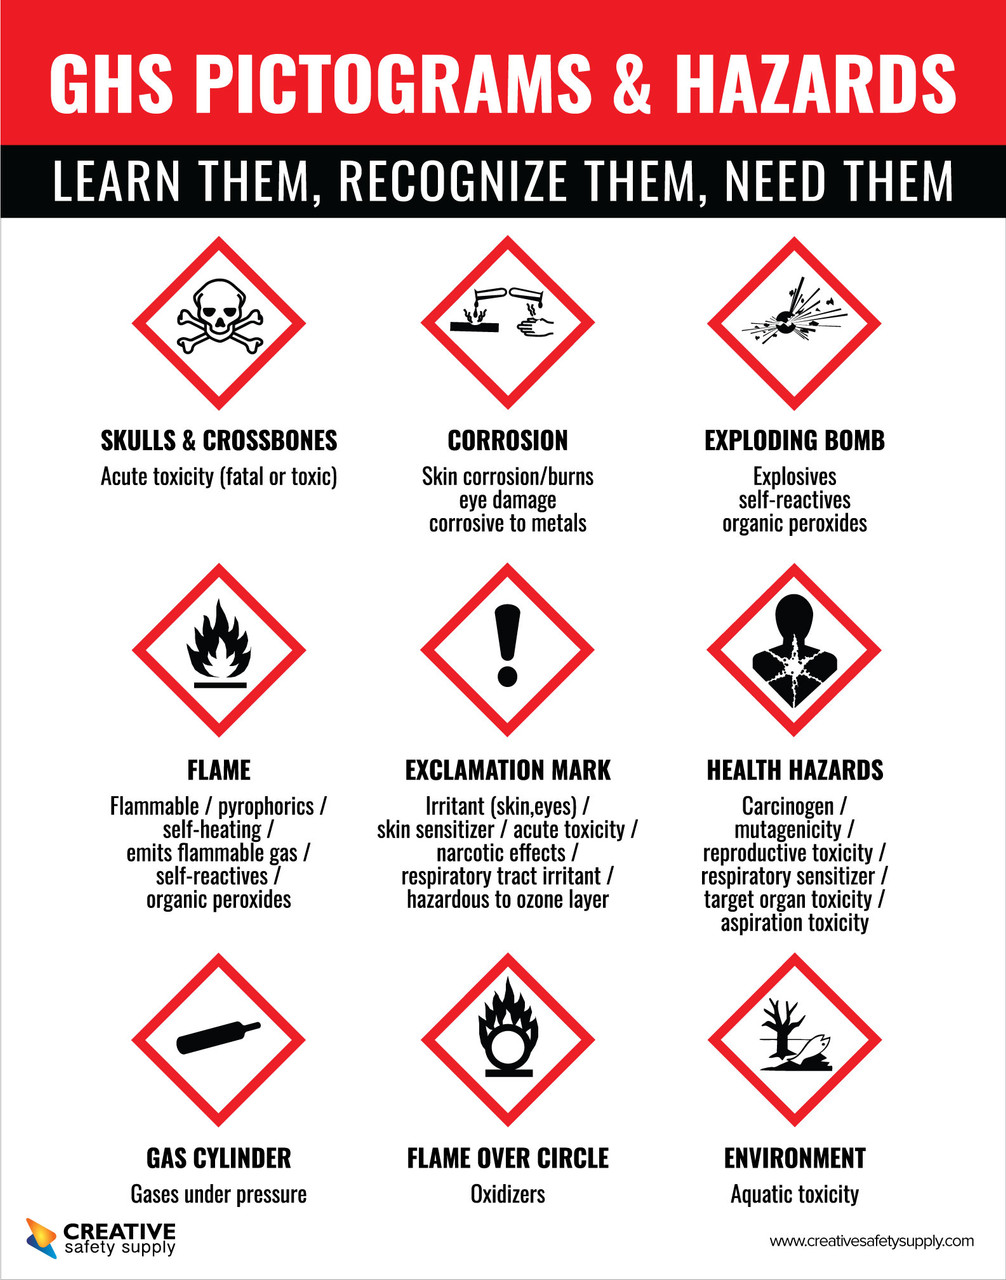 GHS Pictograms and Hazards - Learn Them/Recognize Them/Need Them - Poster